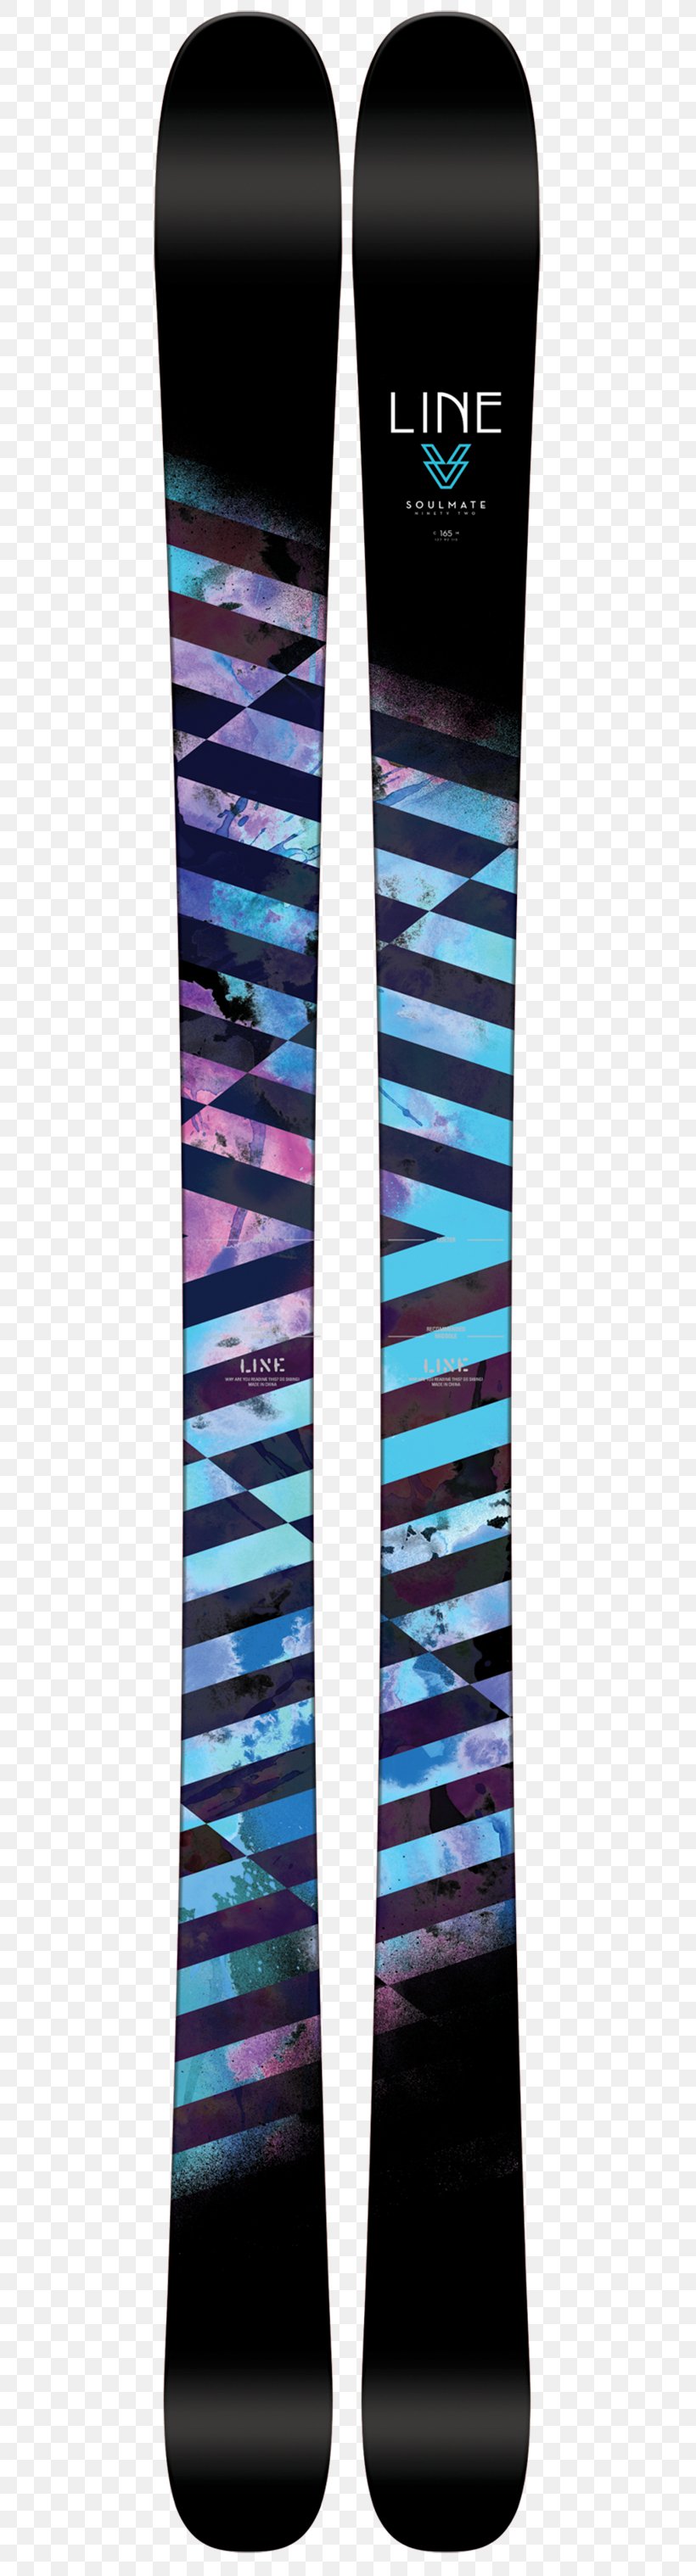 Line Skis Line Supernatural 92 2015/16 Freeskiing Freeriding, PNG, 500x3037px, Line Skis, Alpine Skiing, Backcountry Skiing, Dynastar, Electric Blue Download Free